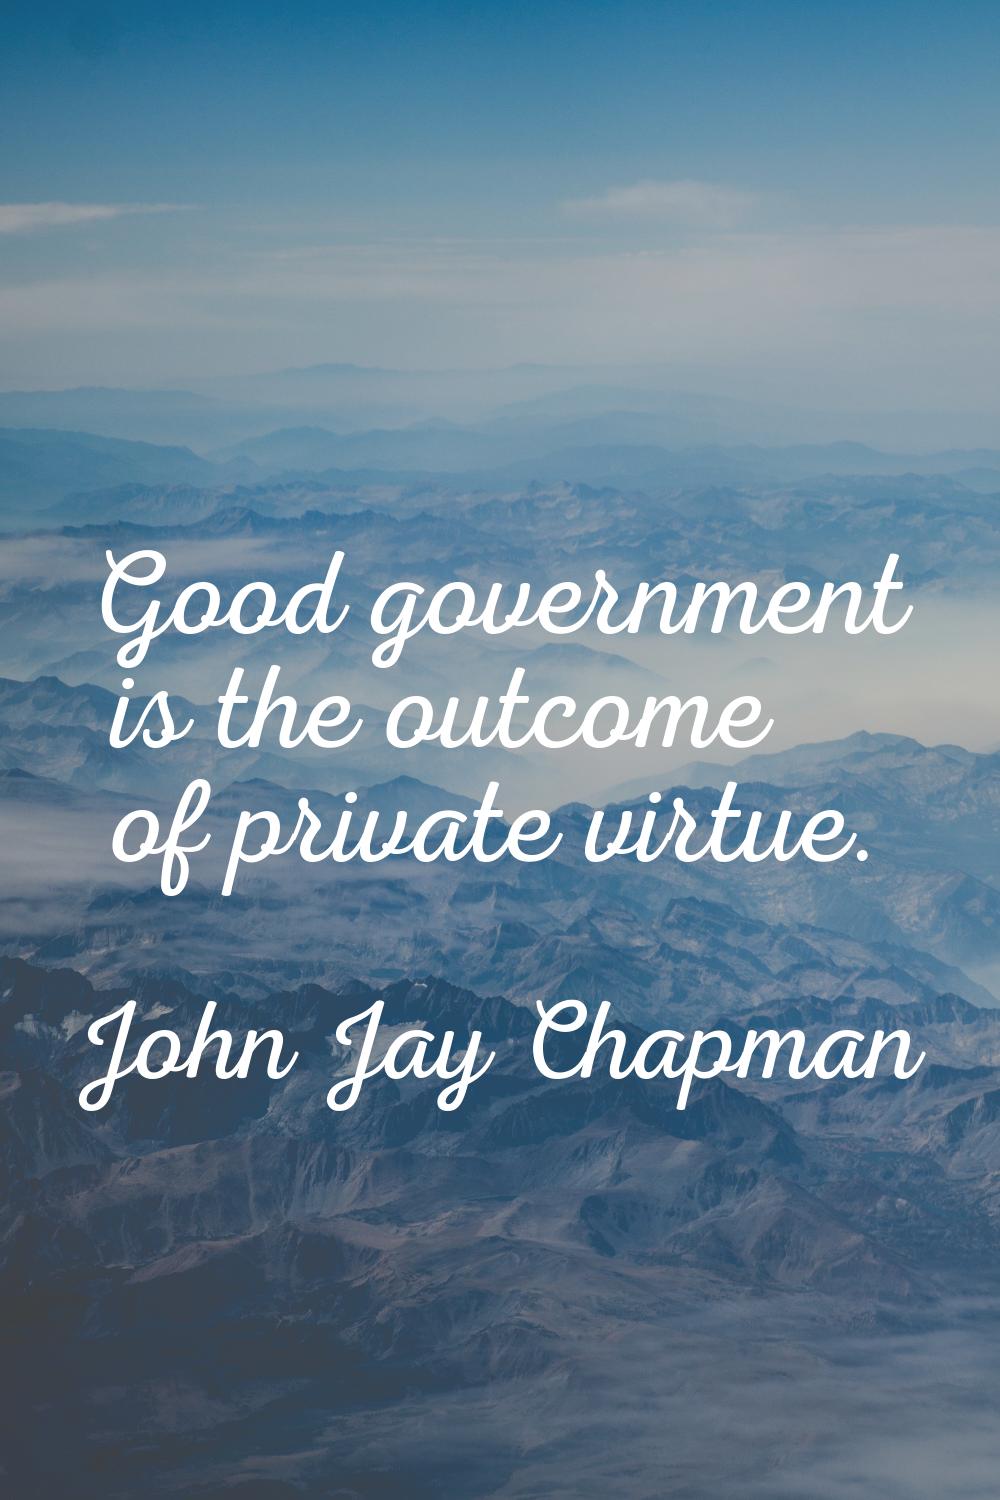 Good government is the outcome of private virtue.